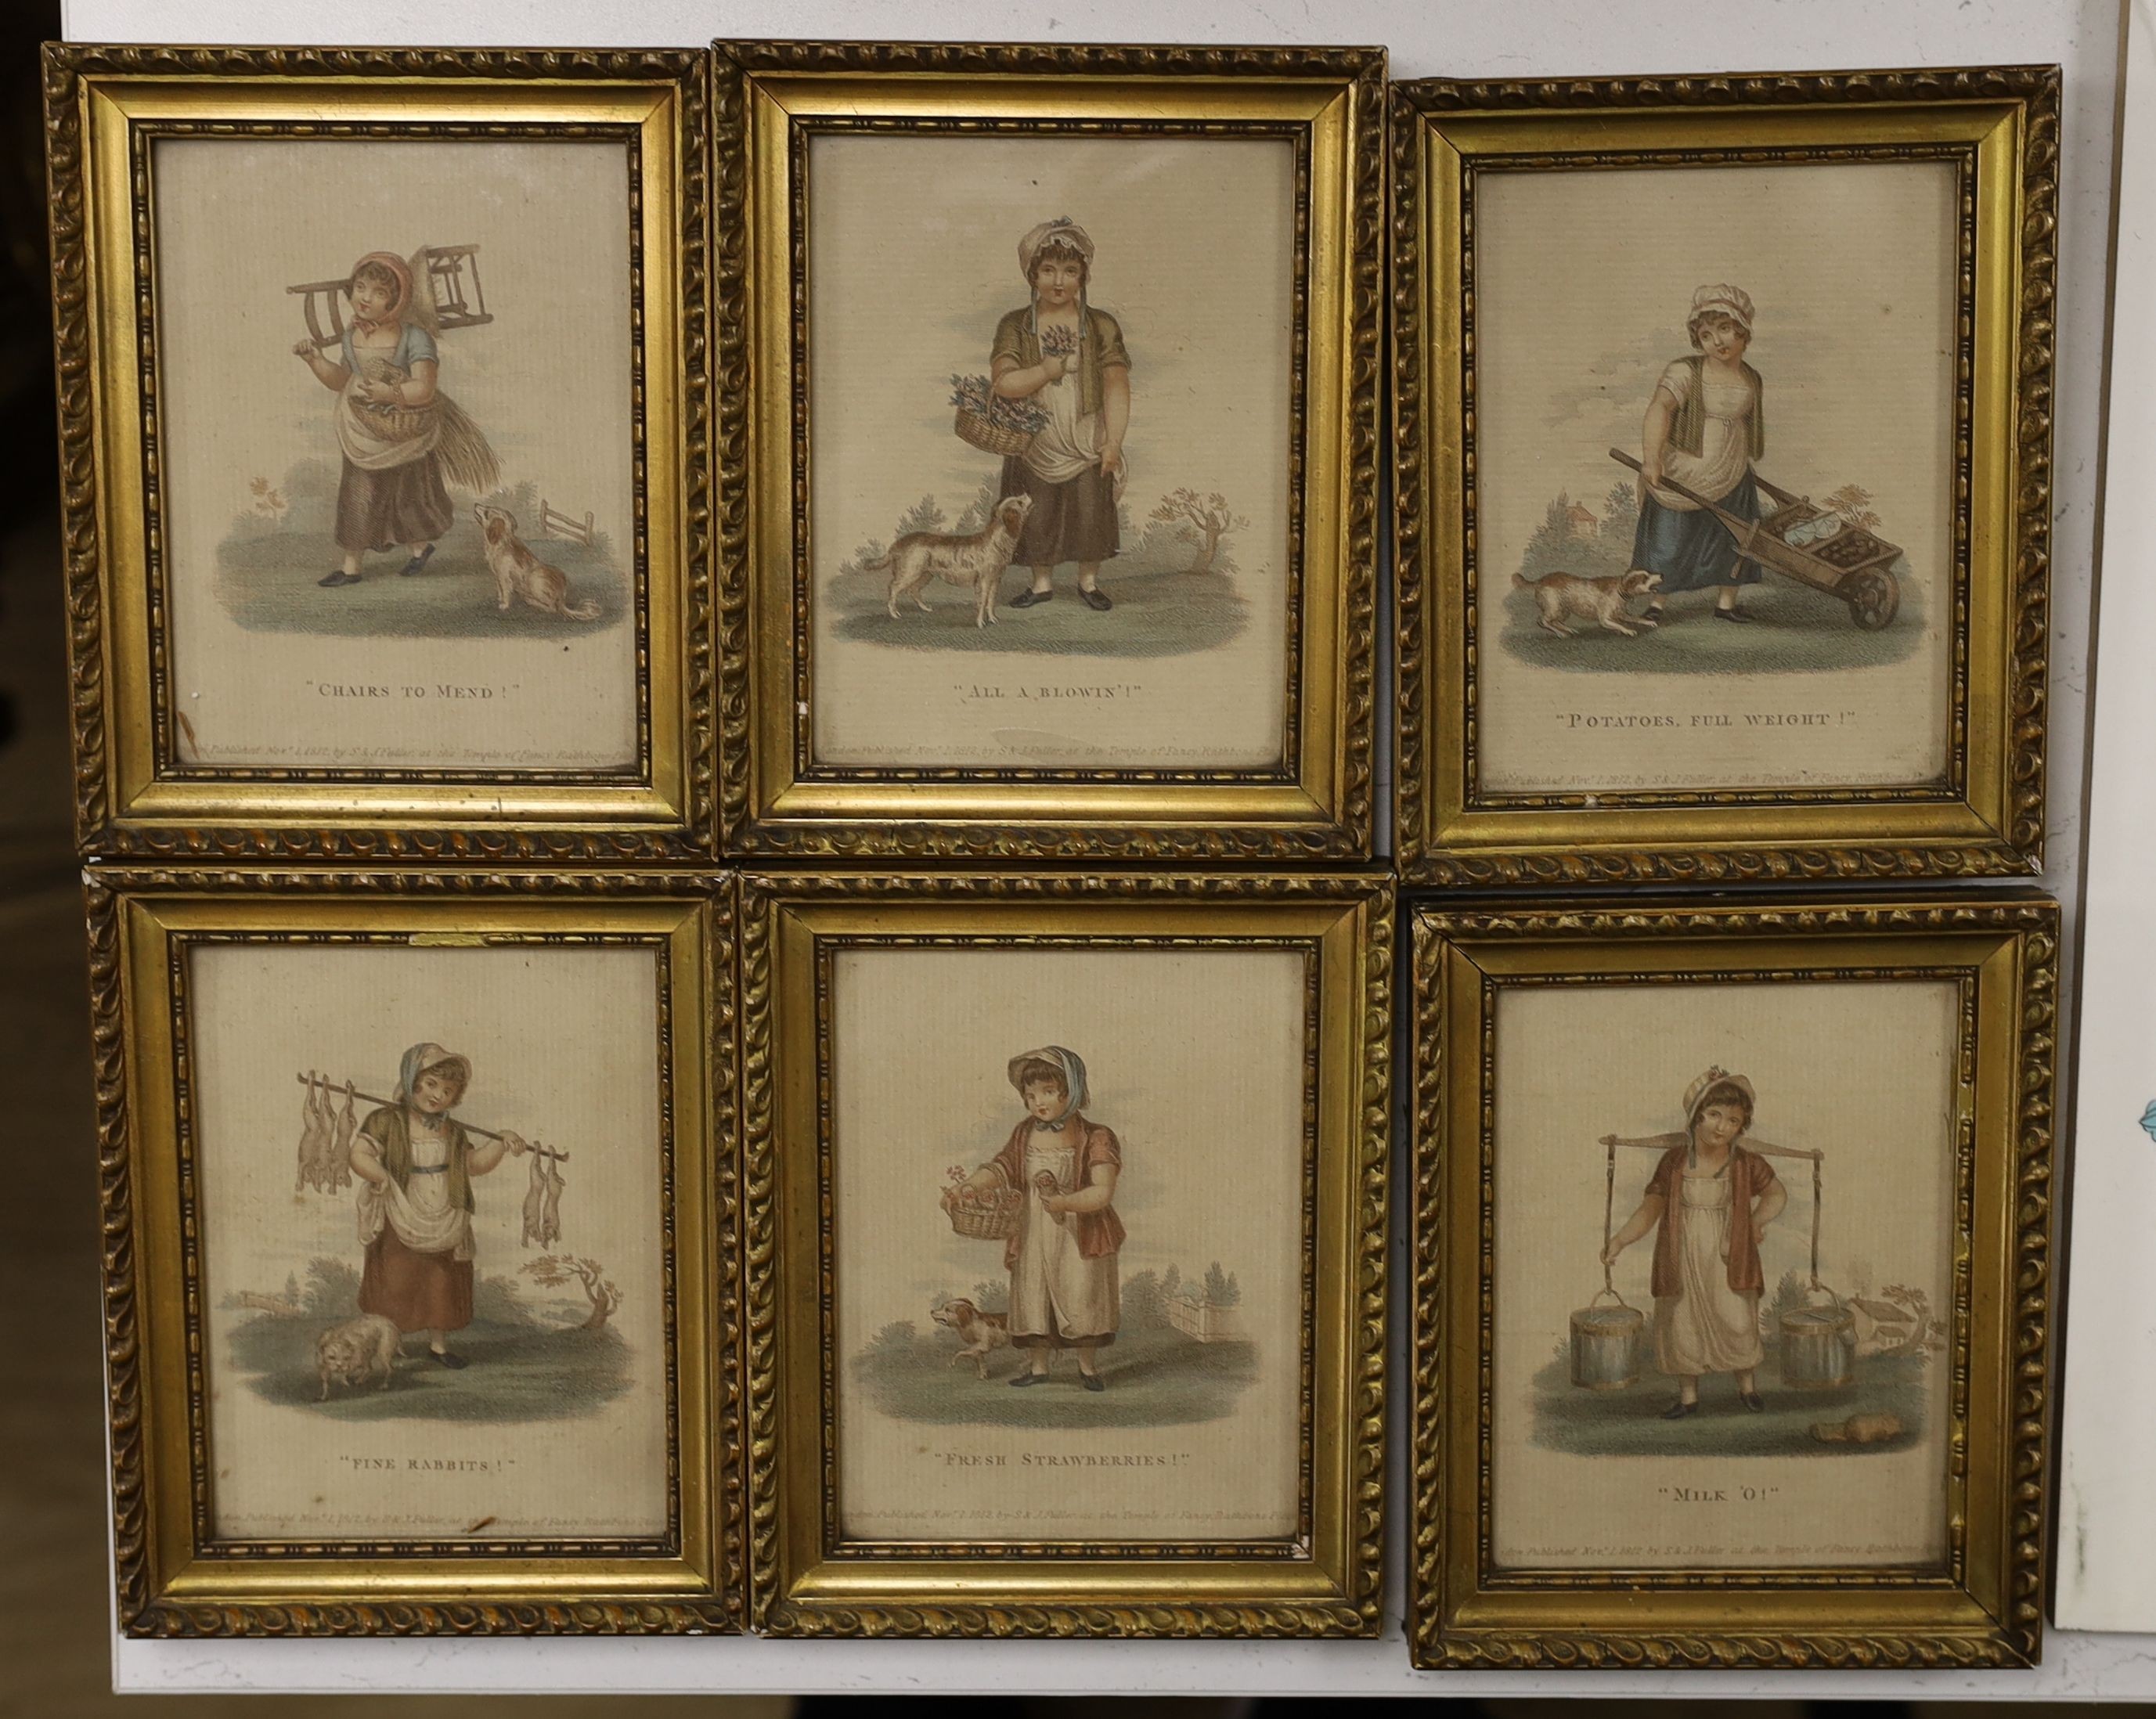 S & J Fuller at the Temple of Fancy, Rathbone Place, 6 hand coloured engravings of town criers 14x10cm